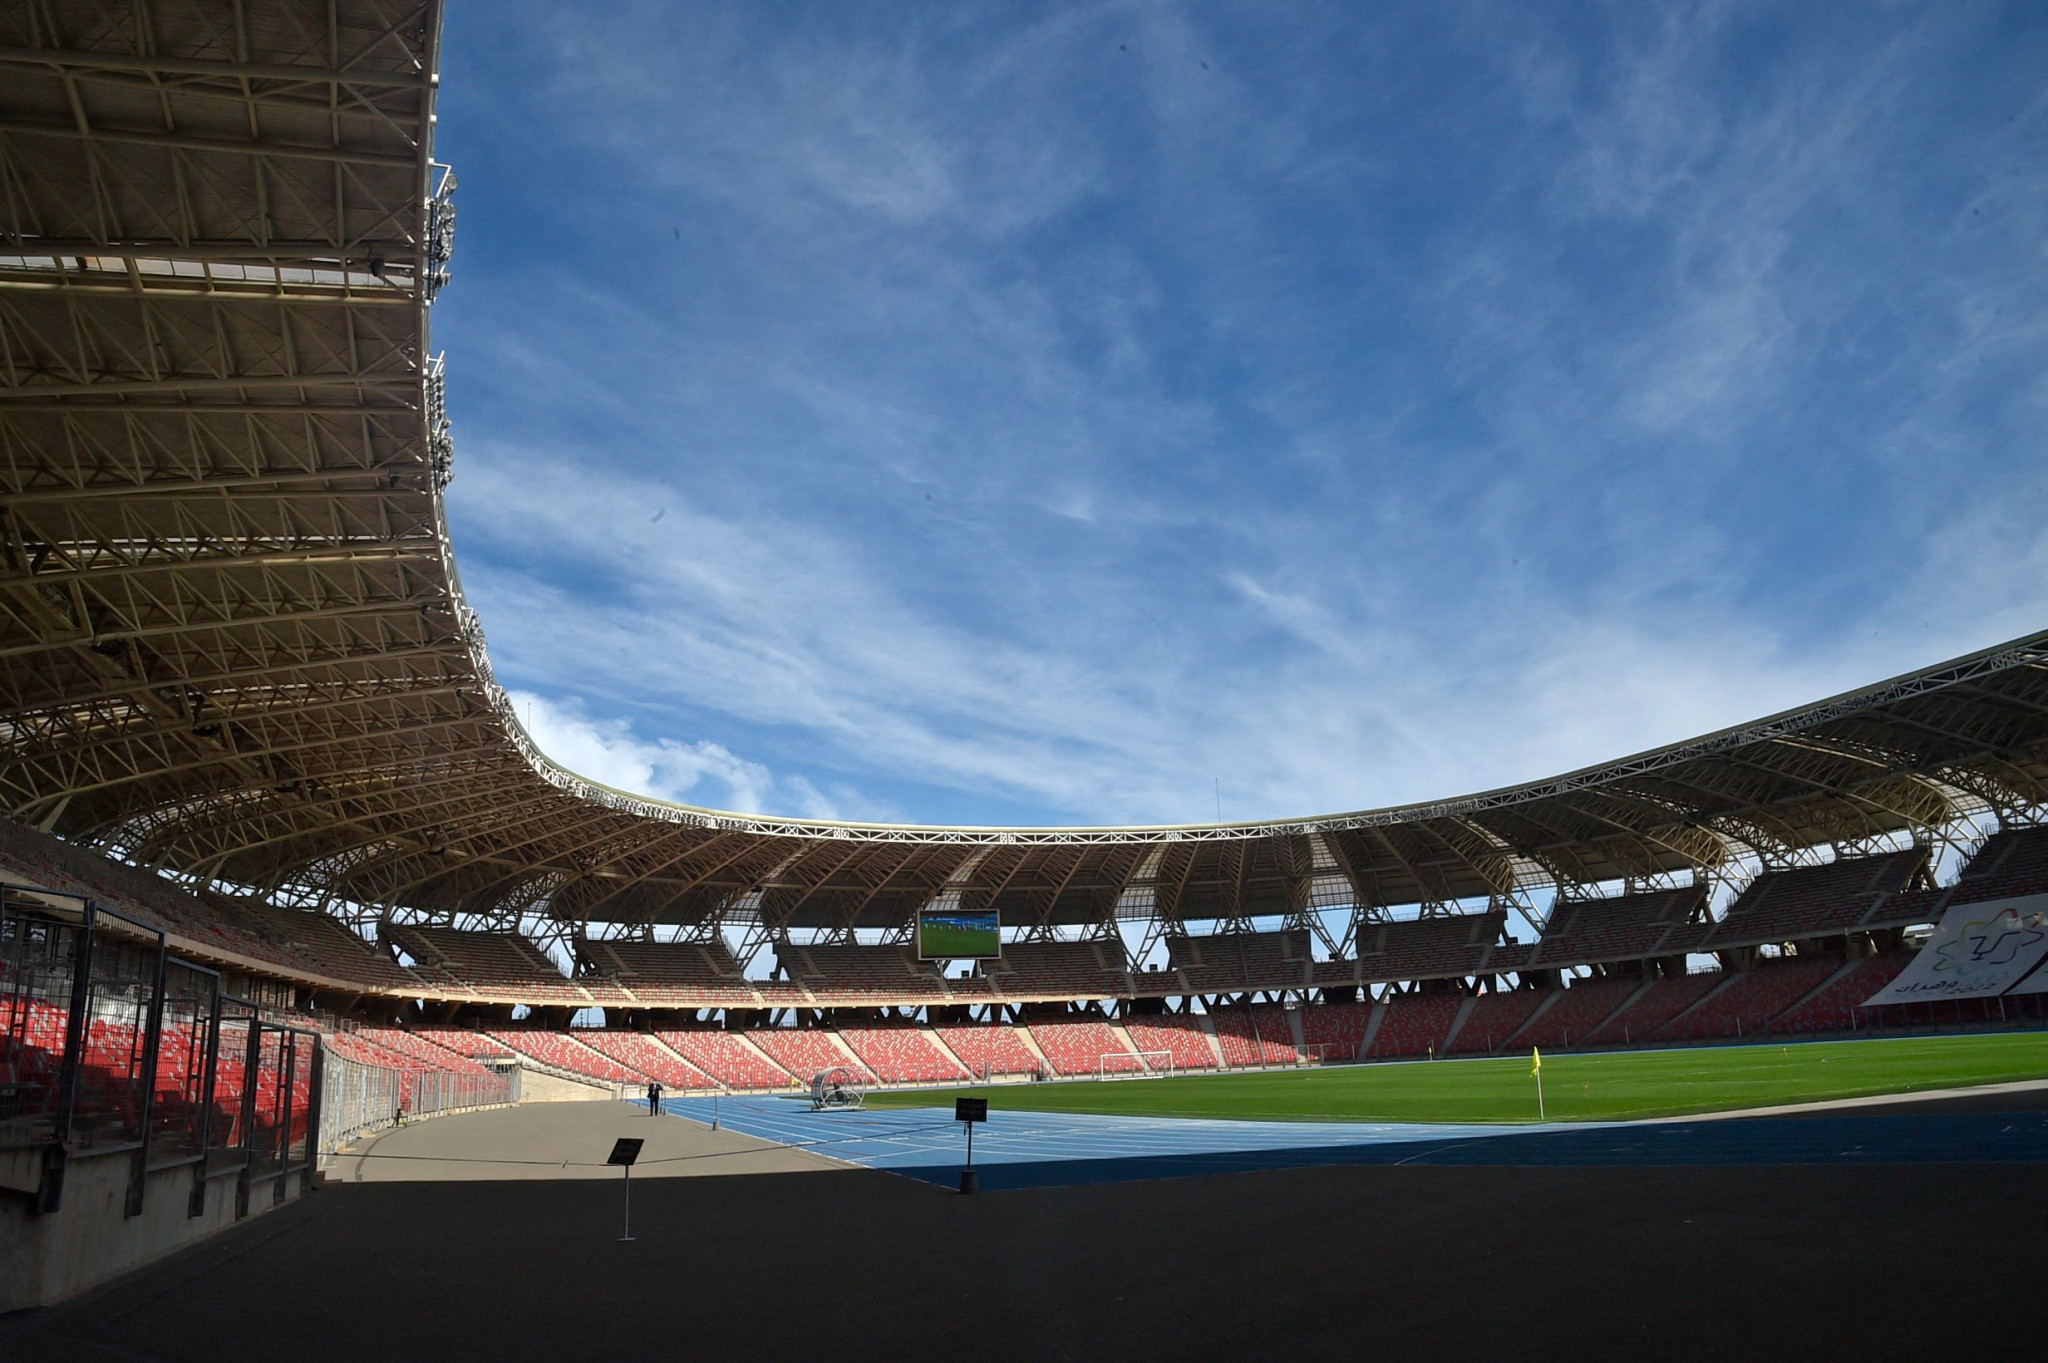 The 2022 Mediterranean Games Opening and Closing Ceremonies are set to take place in the Stade Olympique d'Oran on June 25 and July 6 respectively ©Getty Images